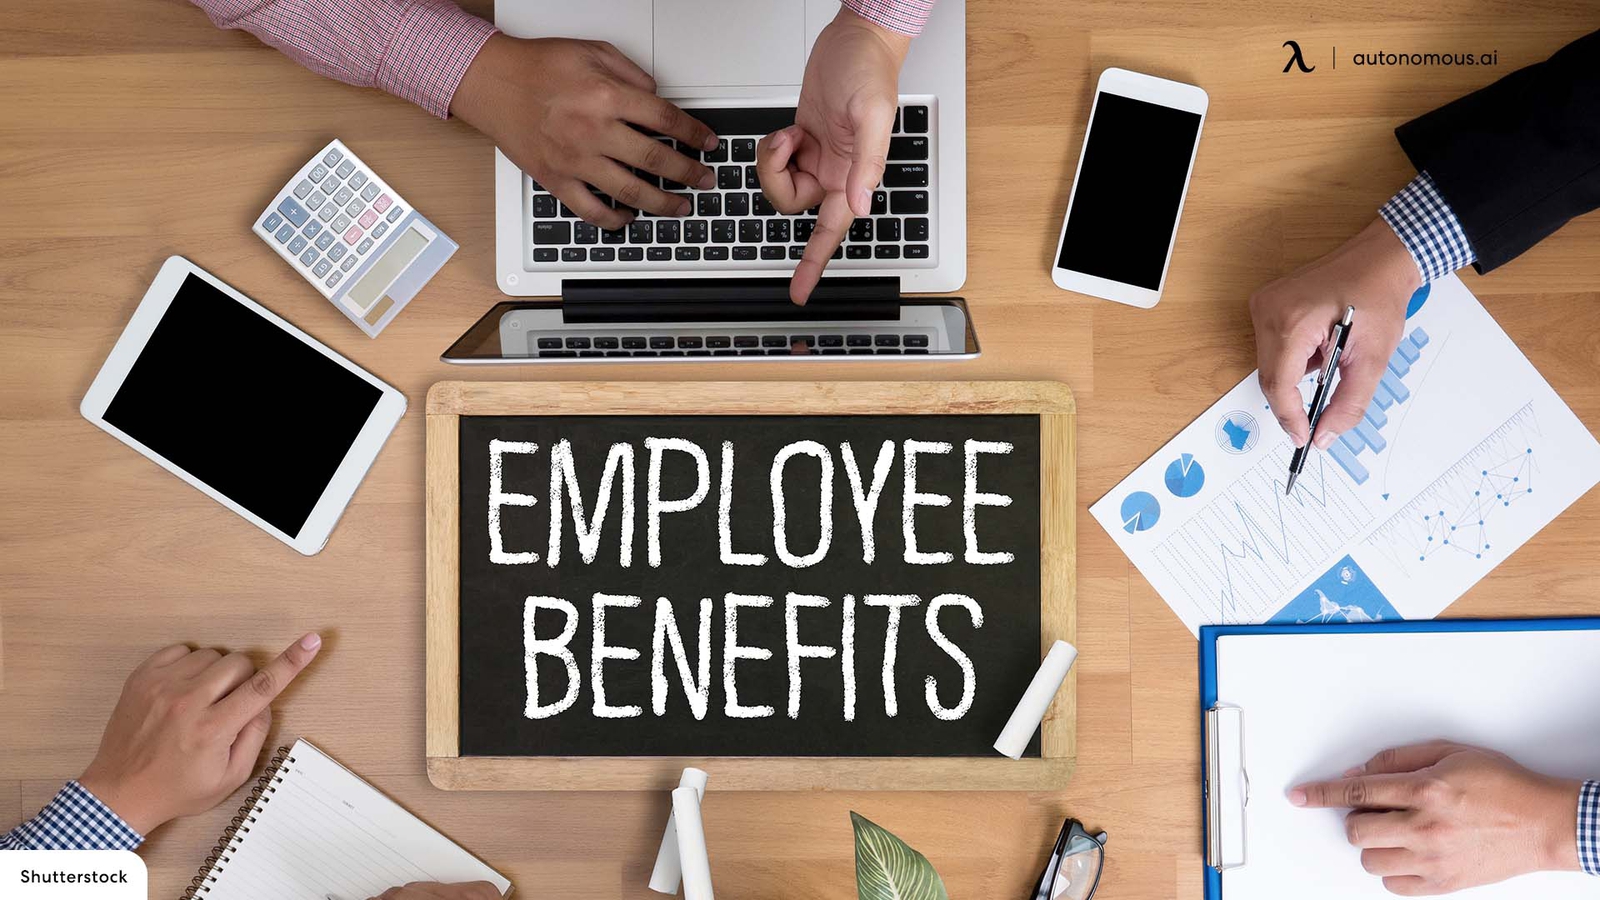 Examples of Common Small Business Benefits Packages